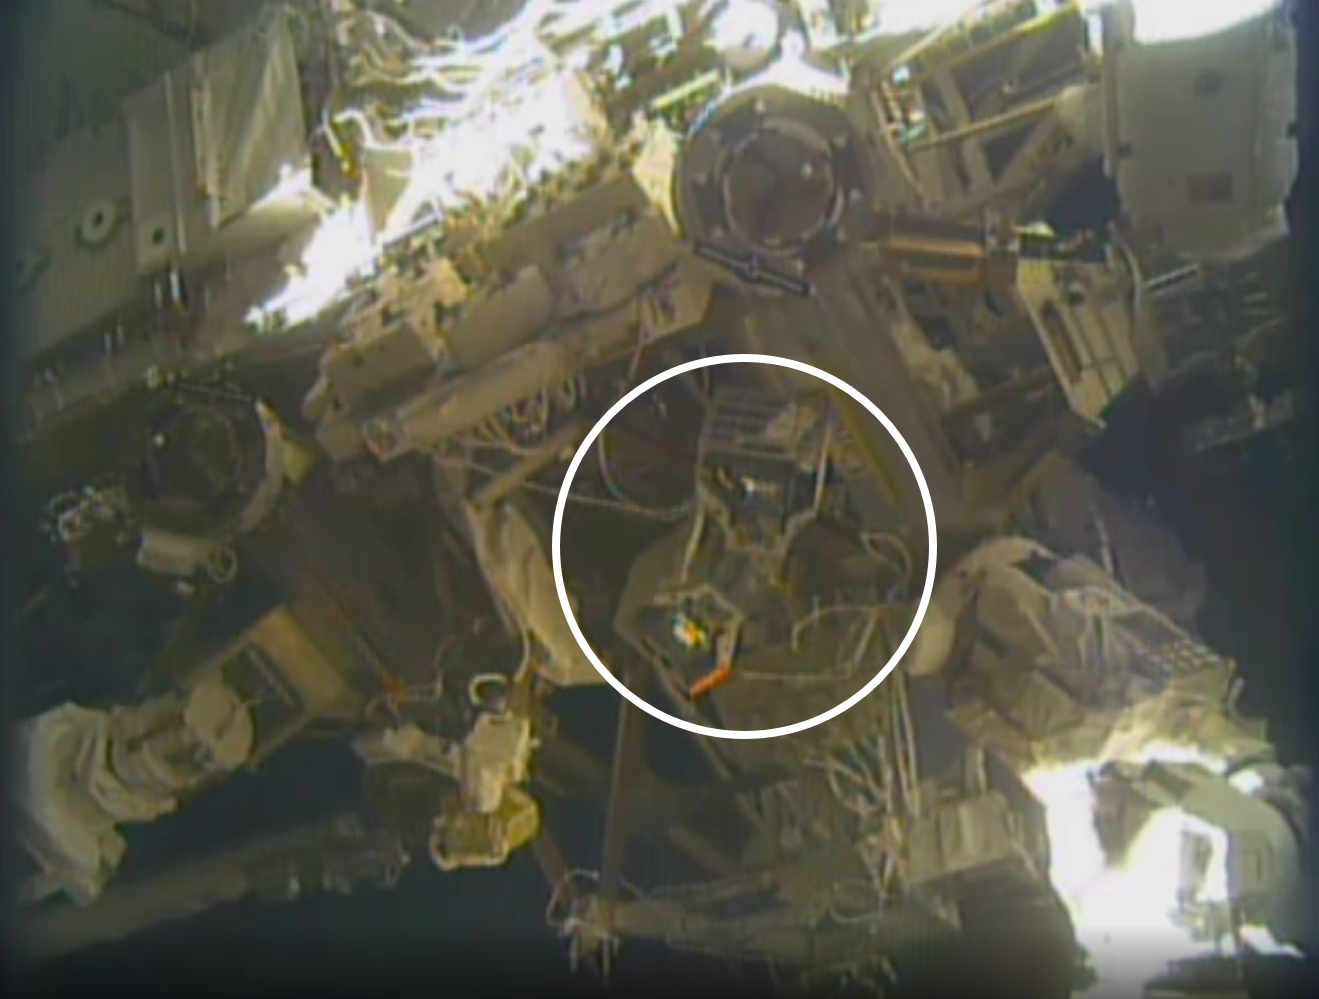 exterior view of ISS showing site of RiTS installation